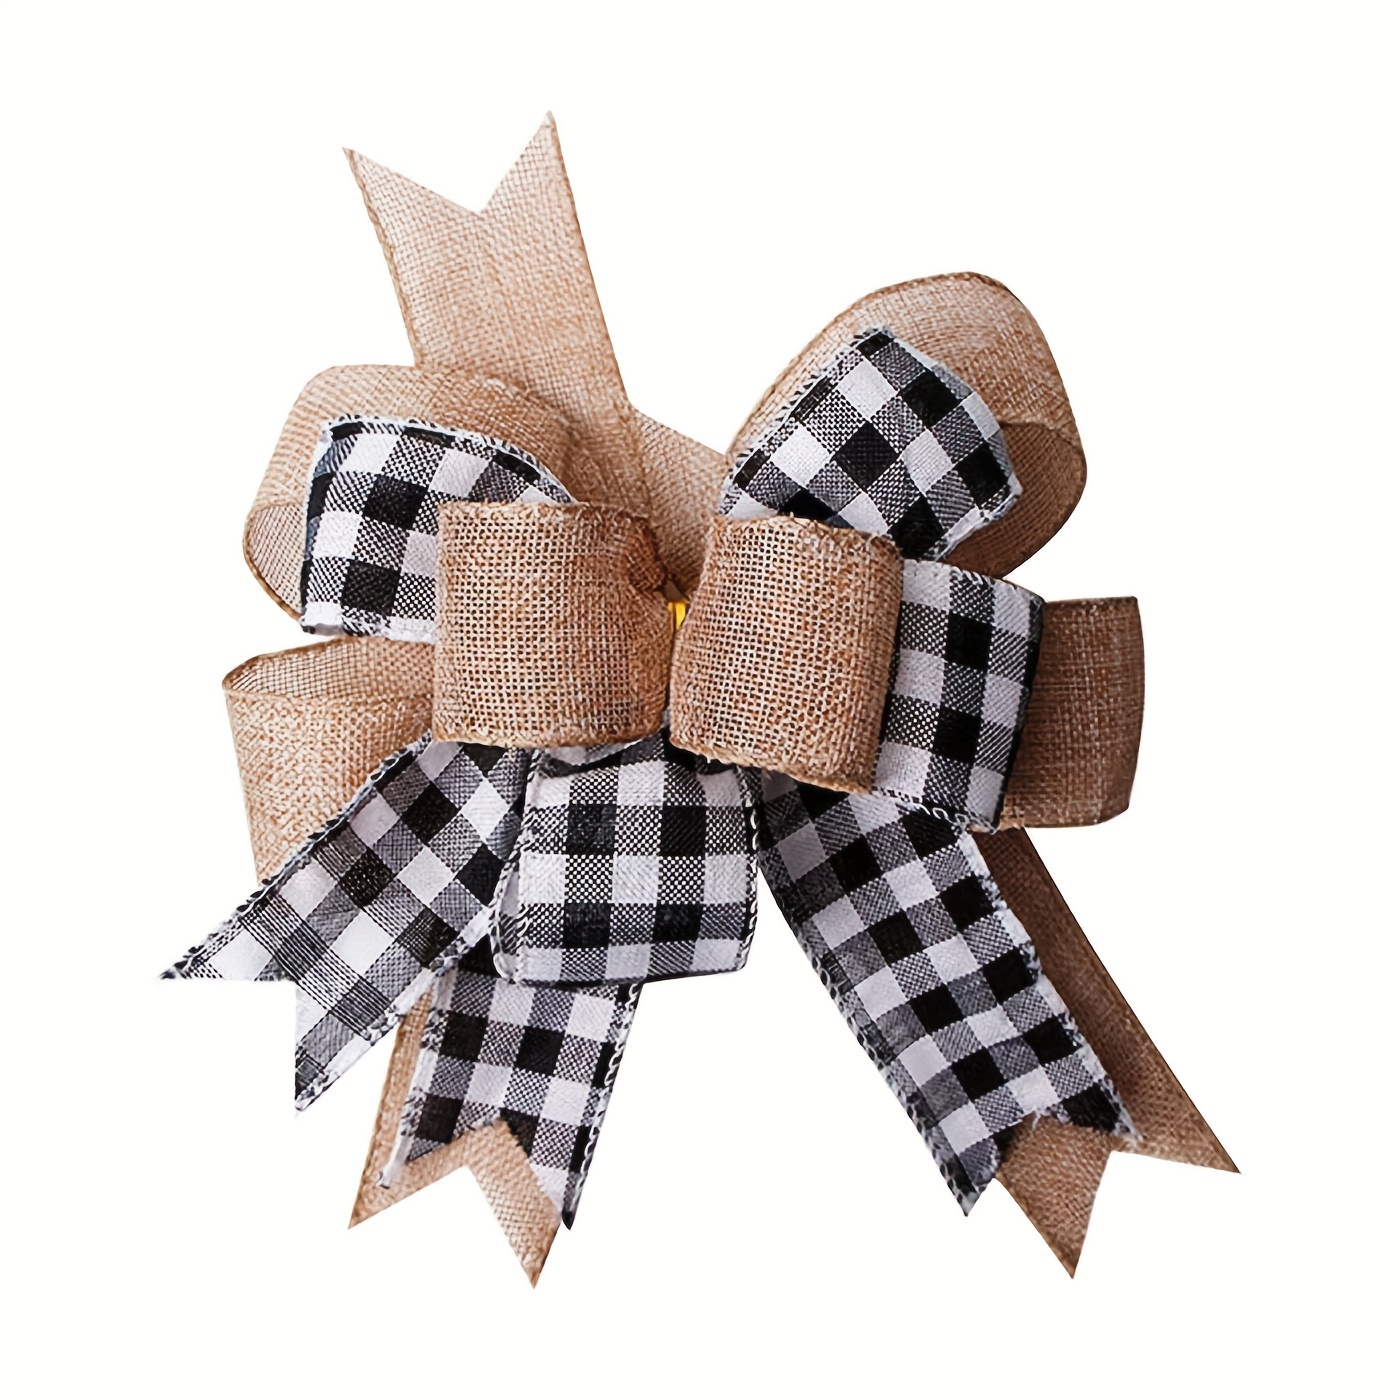 

1pc, Black White Plaid Gift Bows Burlap Wreaths Bows Christmas Tree Topper For Wedding Holiday Birthday Party Decoration, Scene Decor, Room Decor, Home Decor, Holiday Party Decor, Christmas Decor